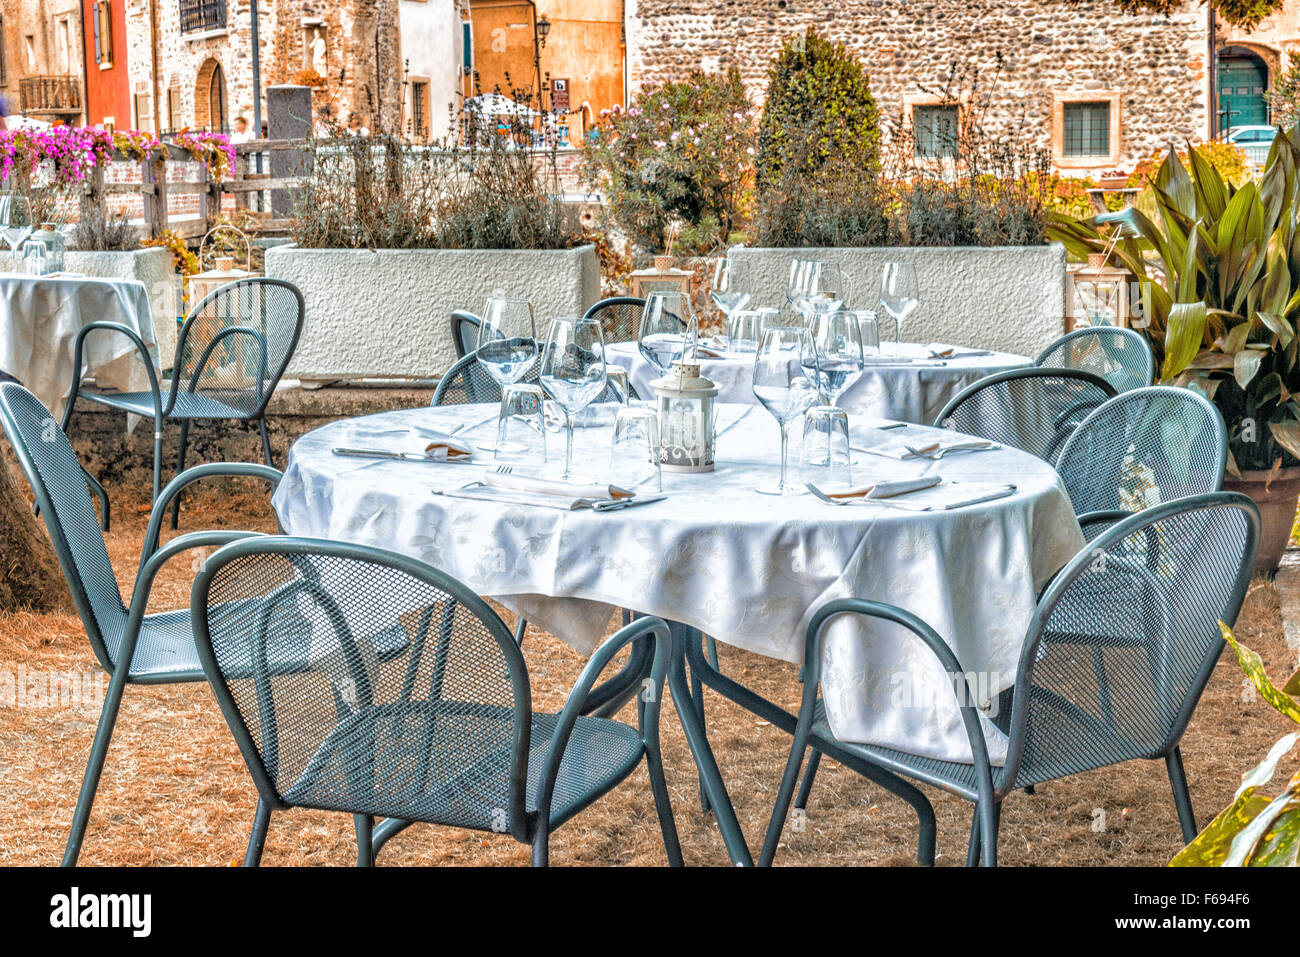 Luxury restaurant table with glasses, napkins and cutlery in a medieval town in the Italian countryside Stock Photo